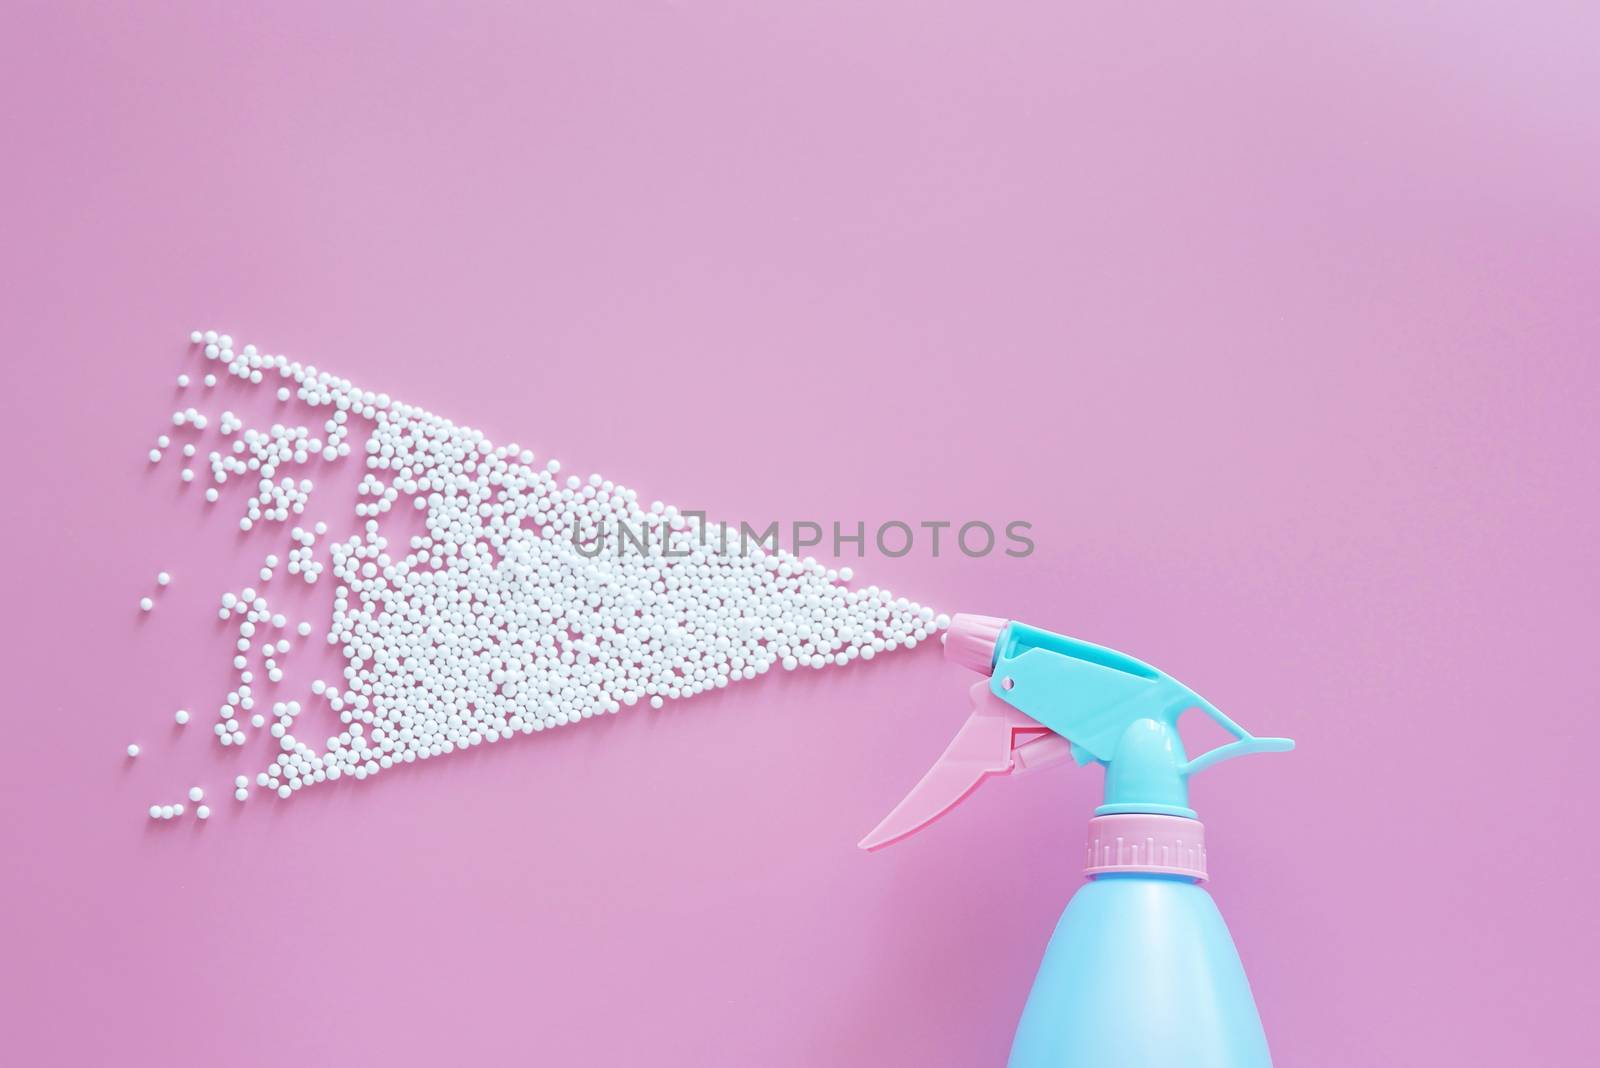 blue spray bottle spraying white bubble foam on pink background with copy space. creative minimal for cleaning concept by asiandelight